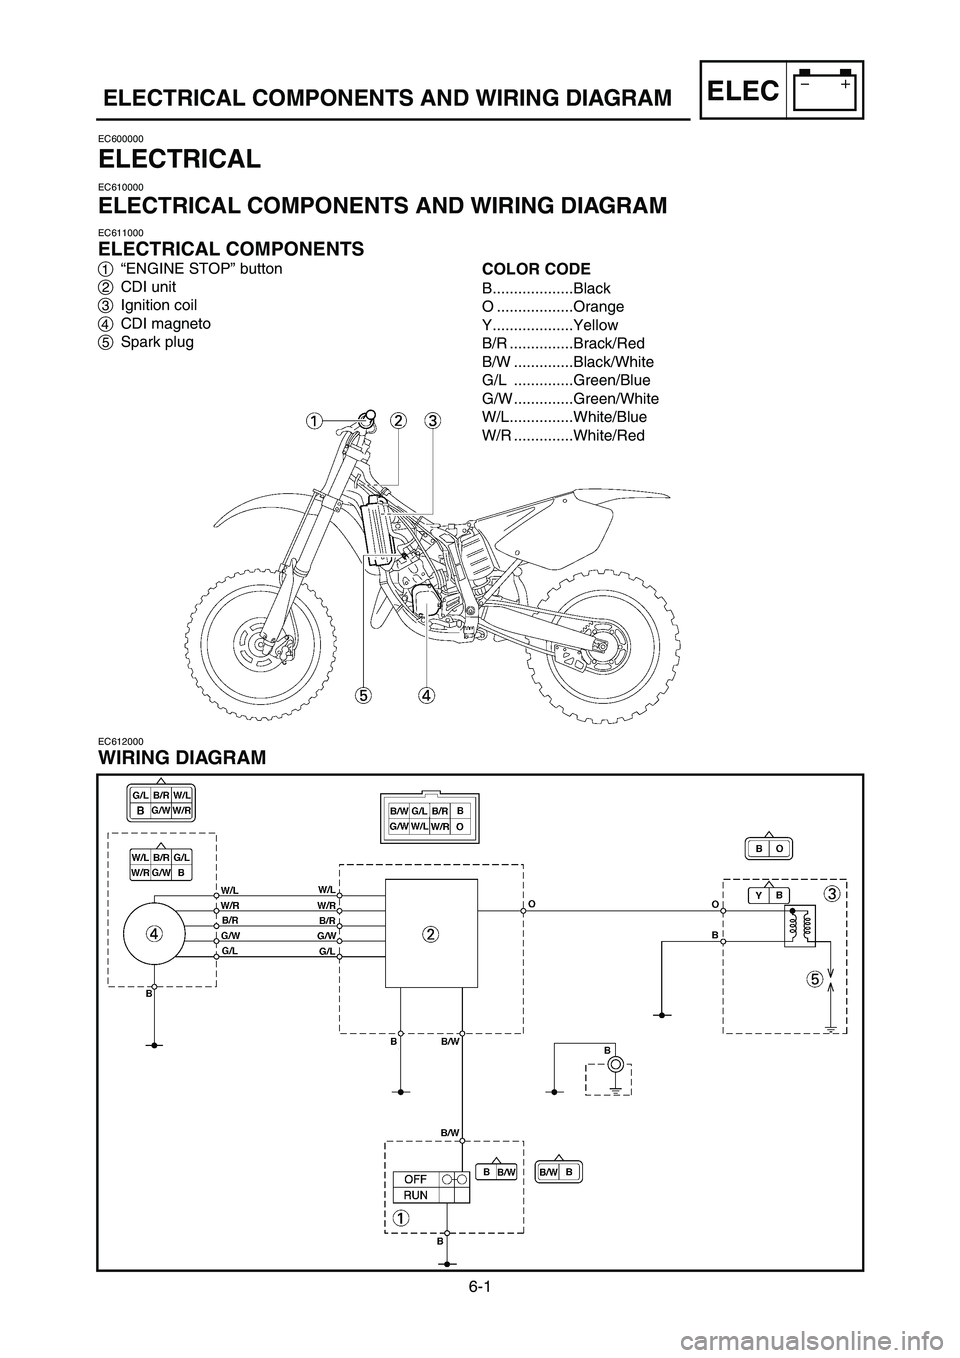 YAMAHA YZ125LC 2006  Manuale duso (in Italian) 6-1
ELECELECTRICAL COMPONENTS AND WIRING DIAGRAM
EC600000
ELECTRICAL
EC610000
ELECTRICAL COMPONENTS AND WIRING DIAGRAM
EC611000
ELECTRICAL COMPONENTS
1“ENGINE STOP” button
2CDI unit
3Ignition coil